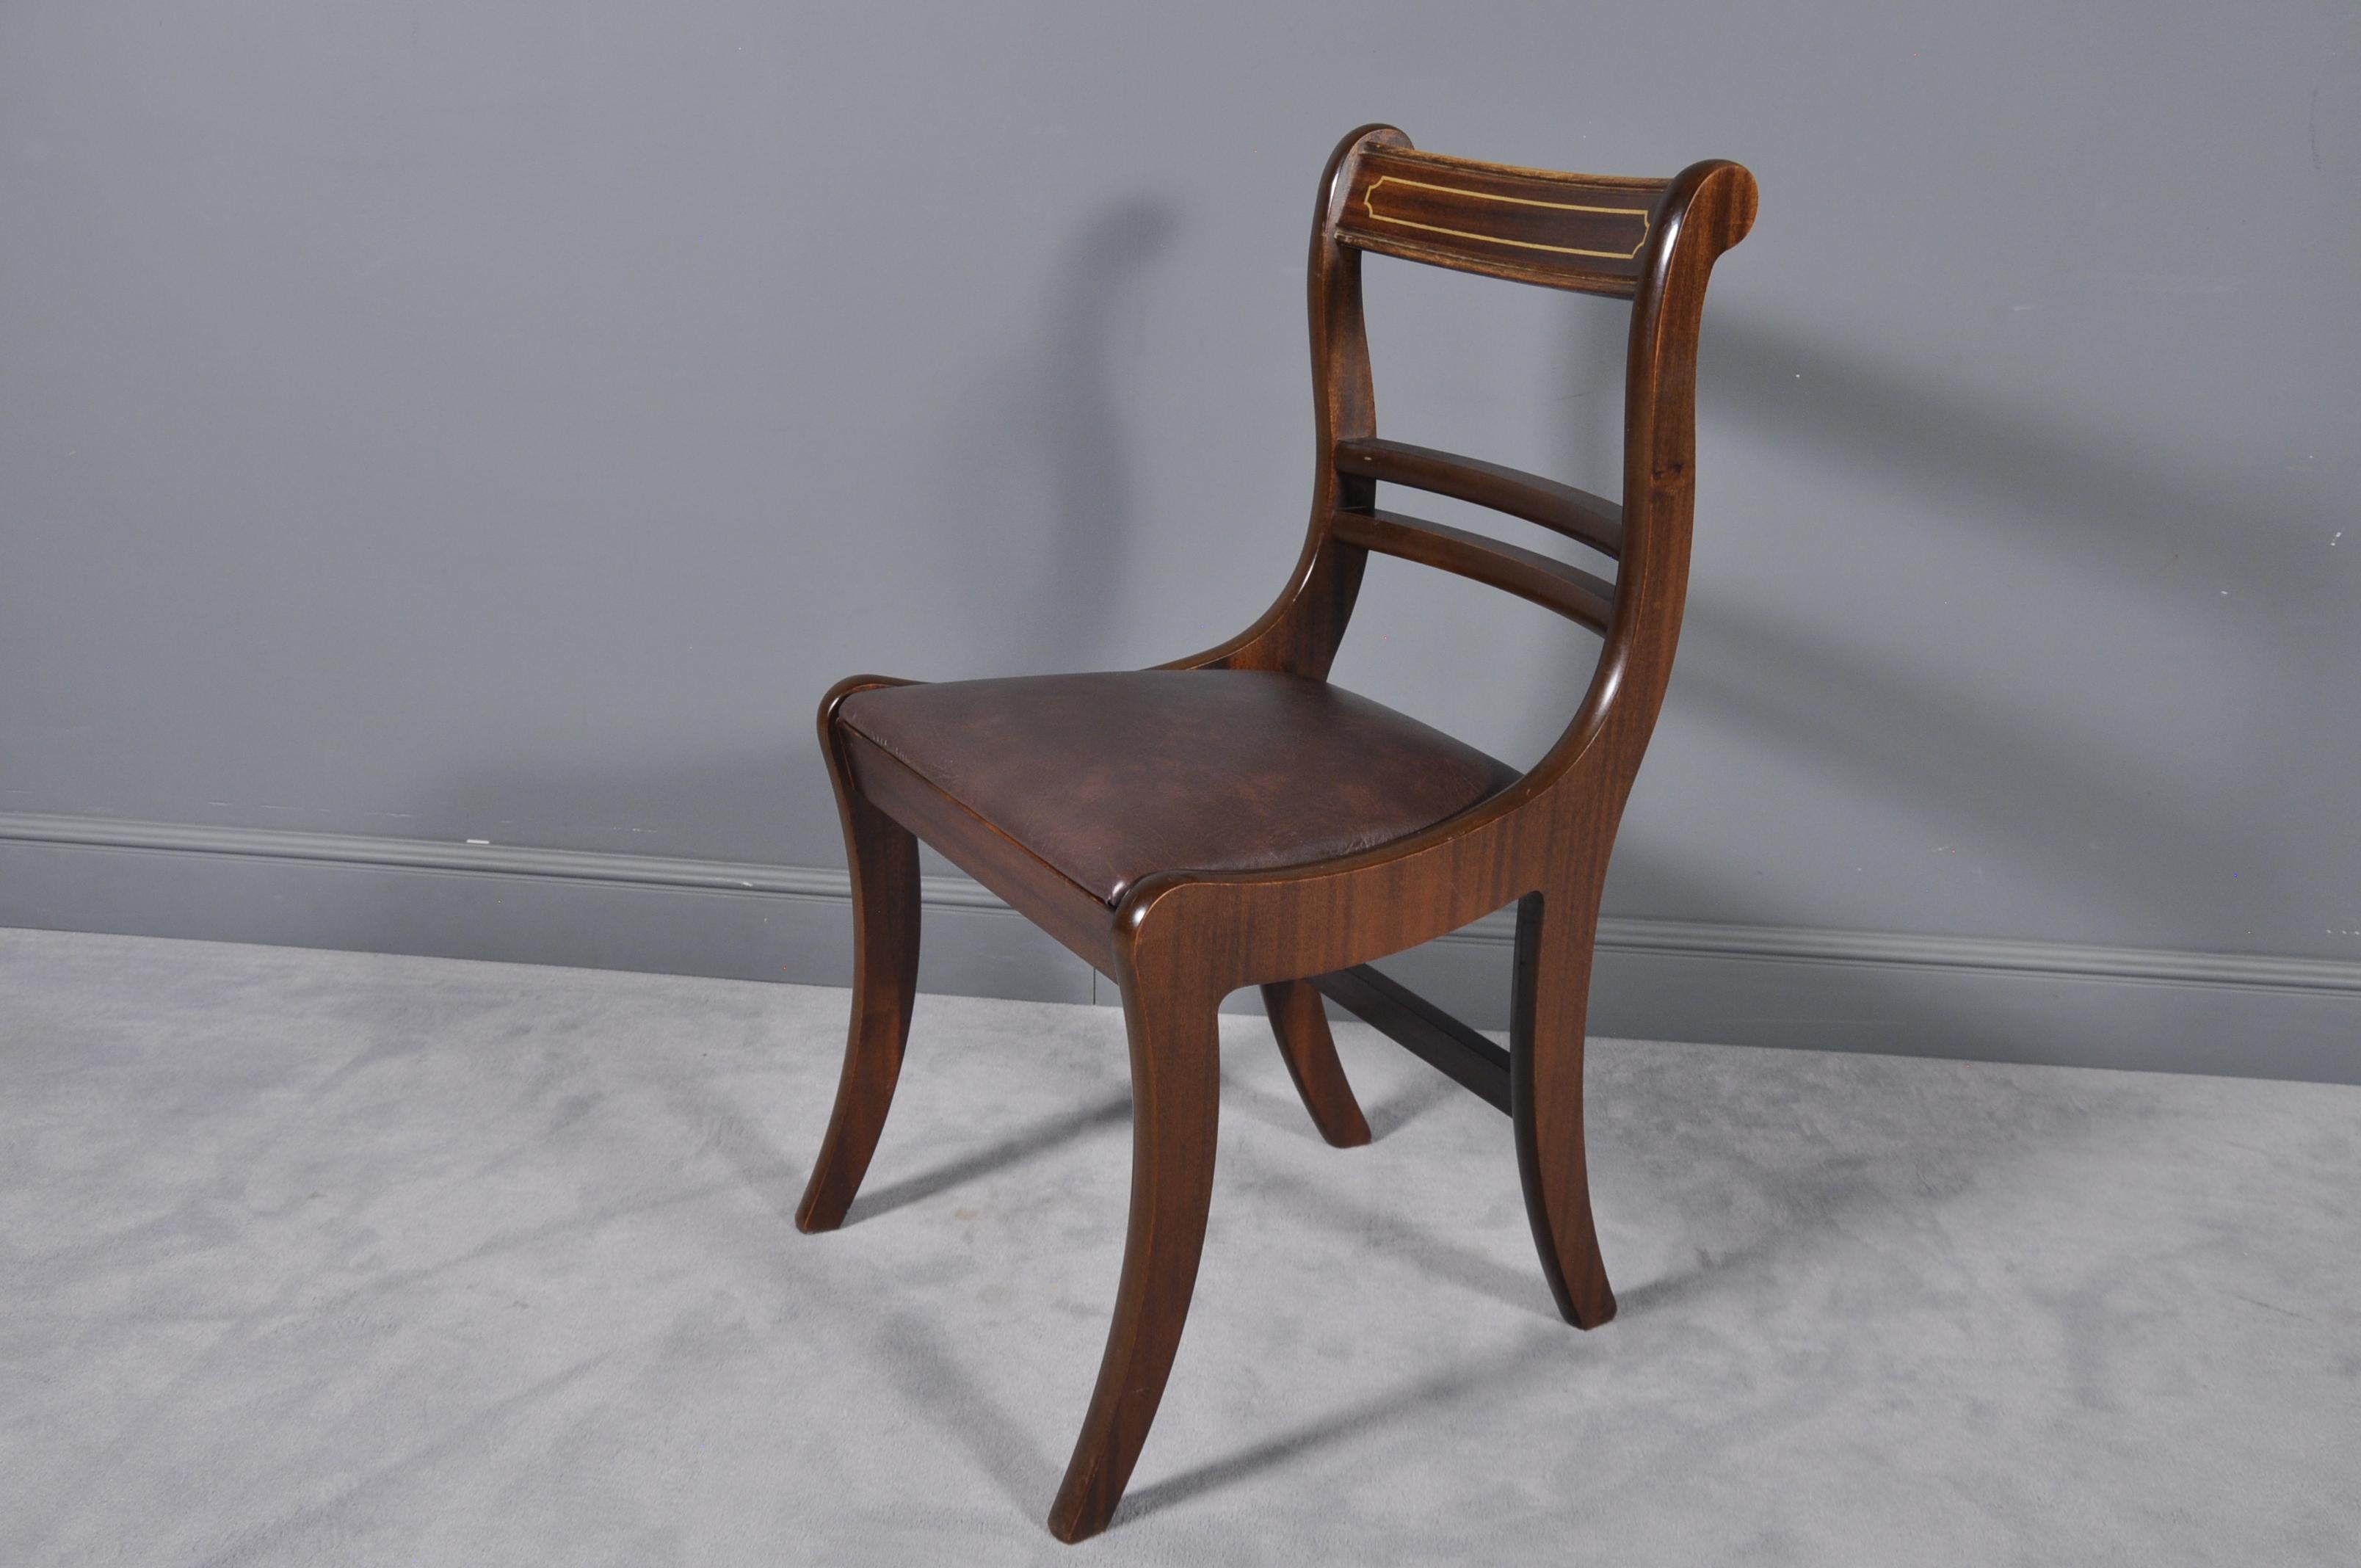 Set of Six 19th Century English Neoclassical Dining Chairs im Angebot 6